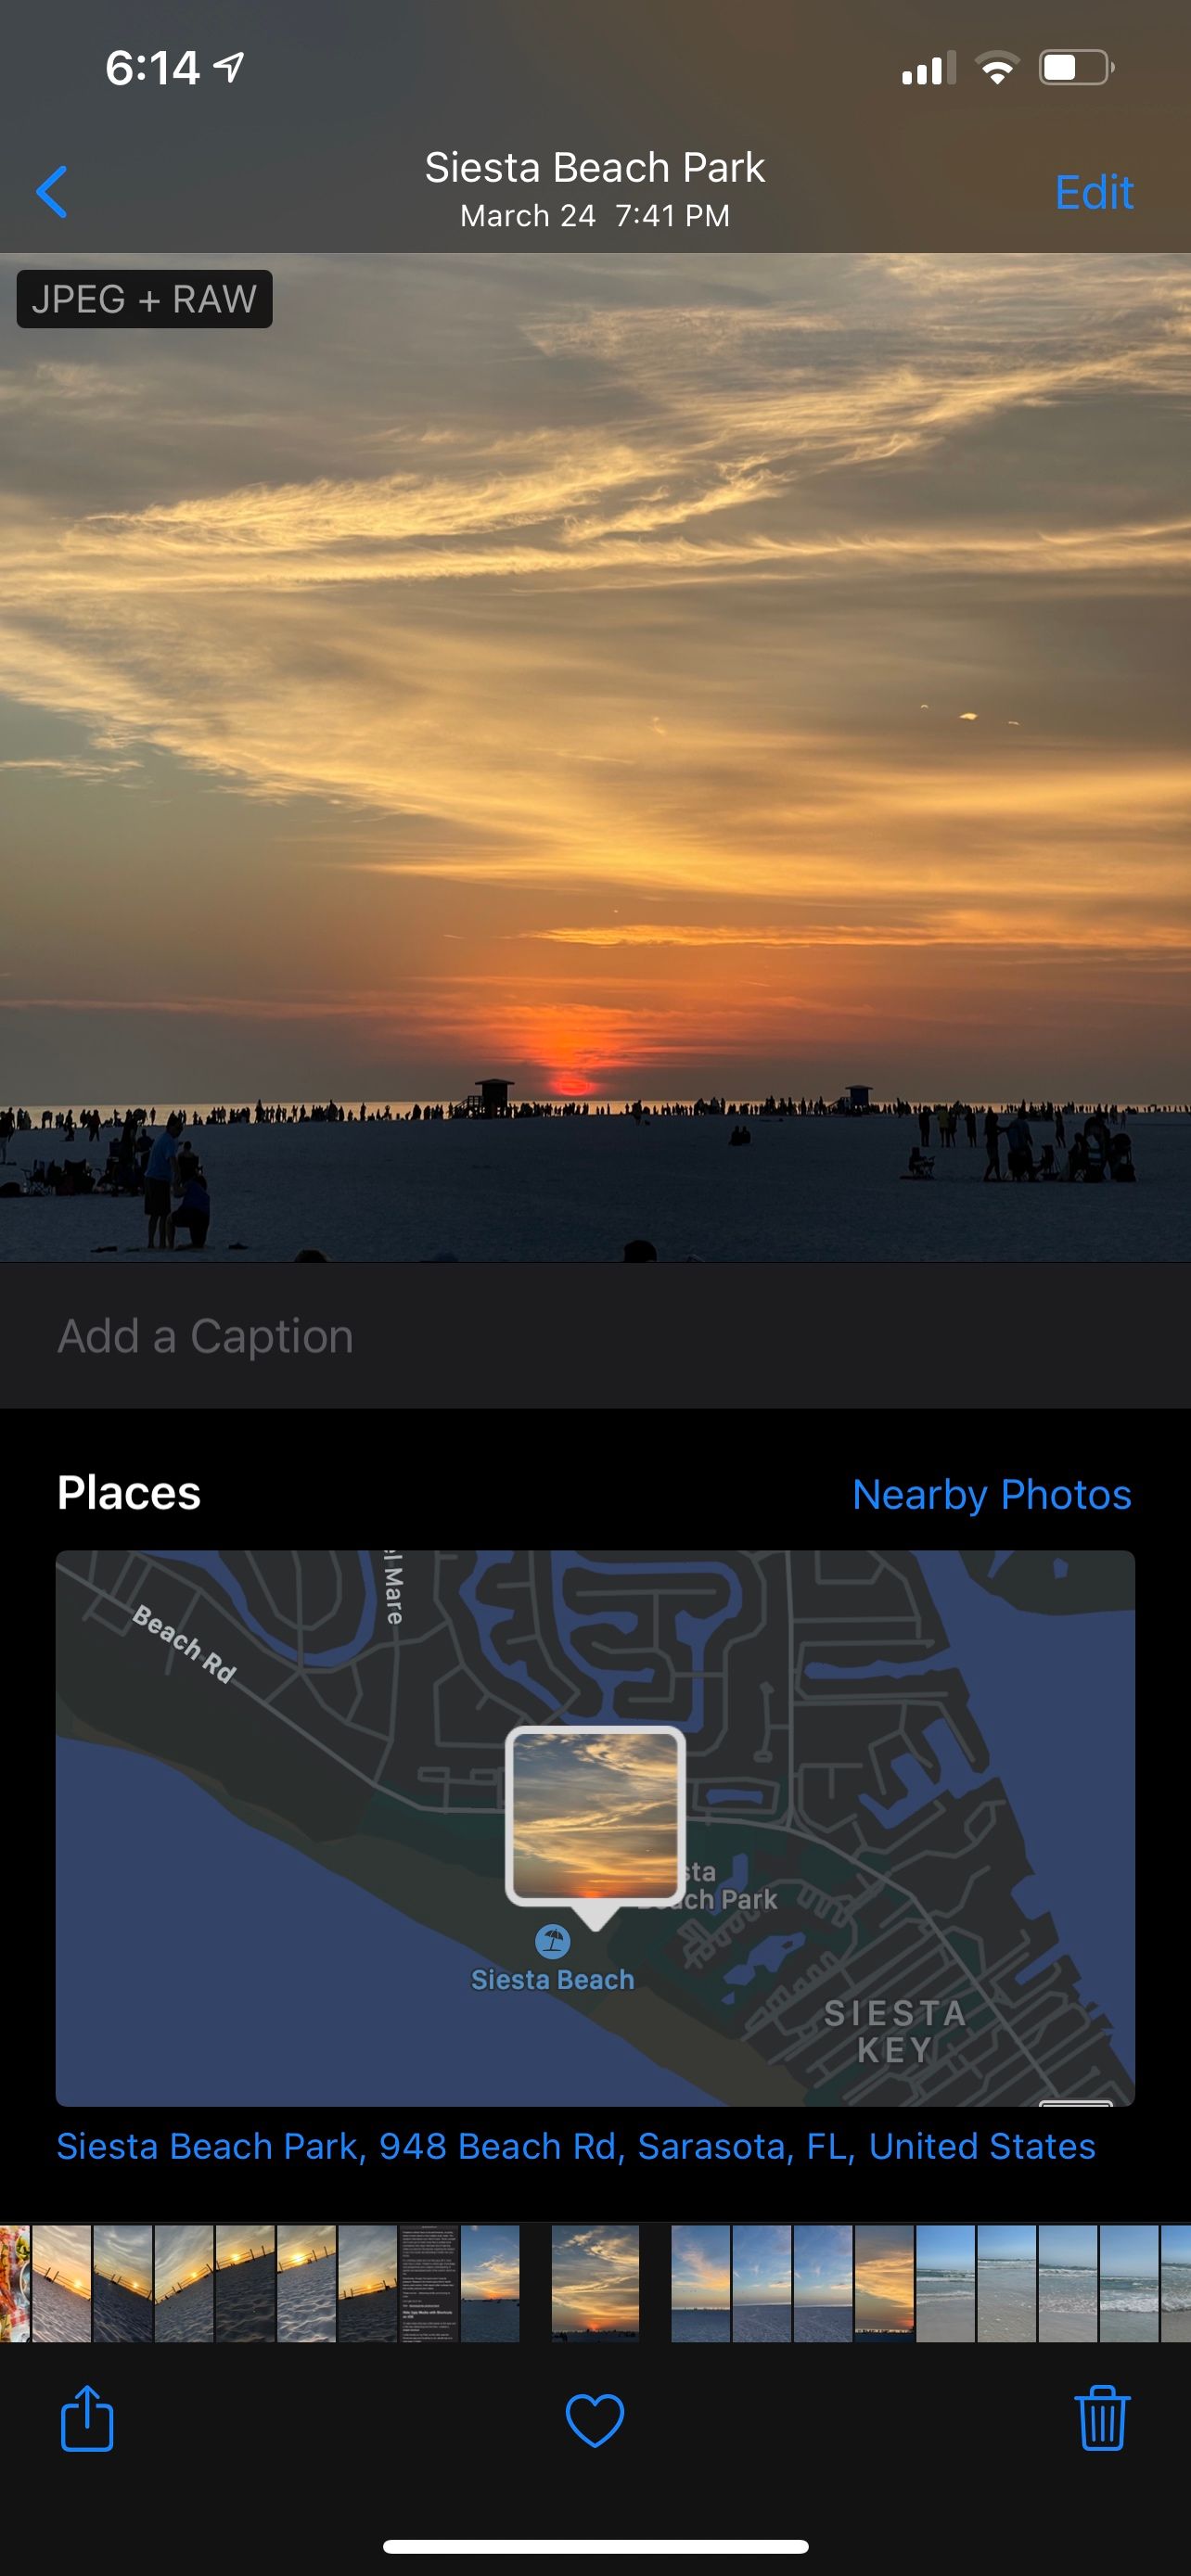 Viewing photo details on an iPhone.